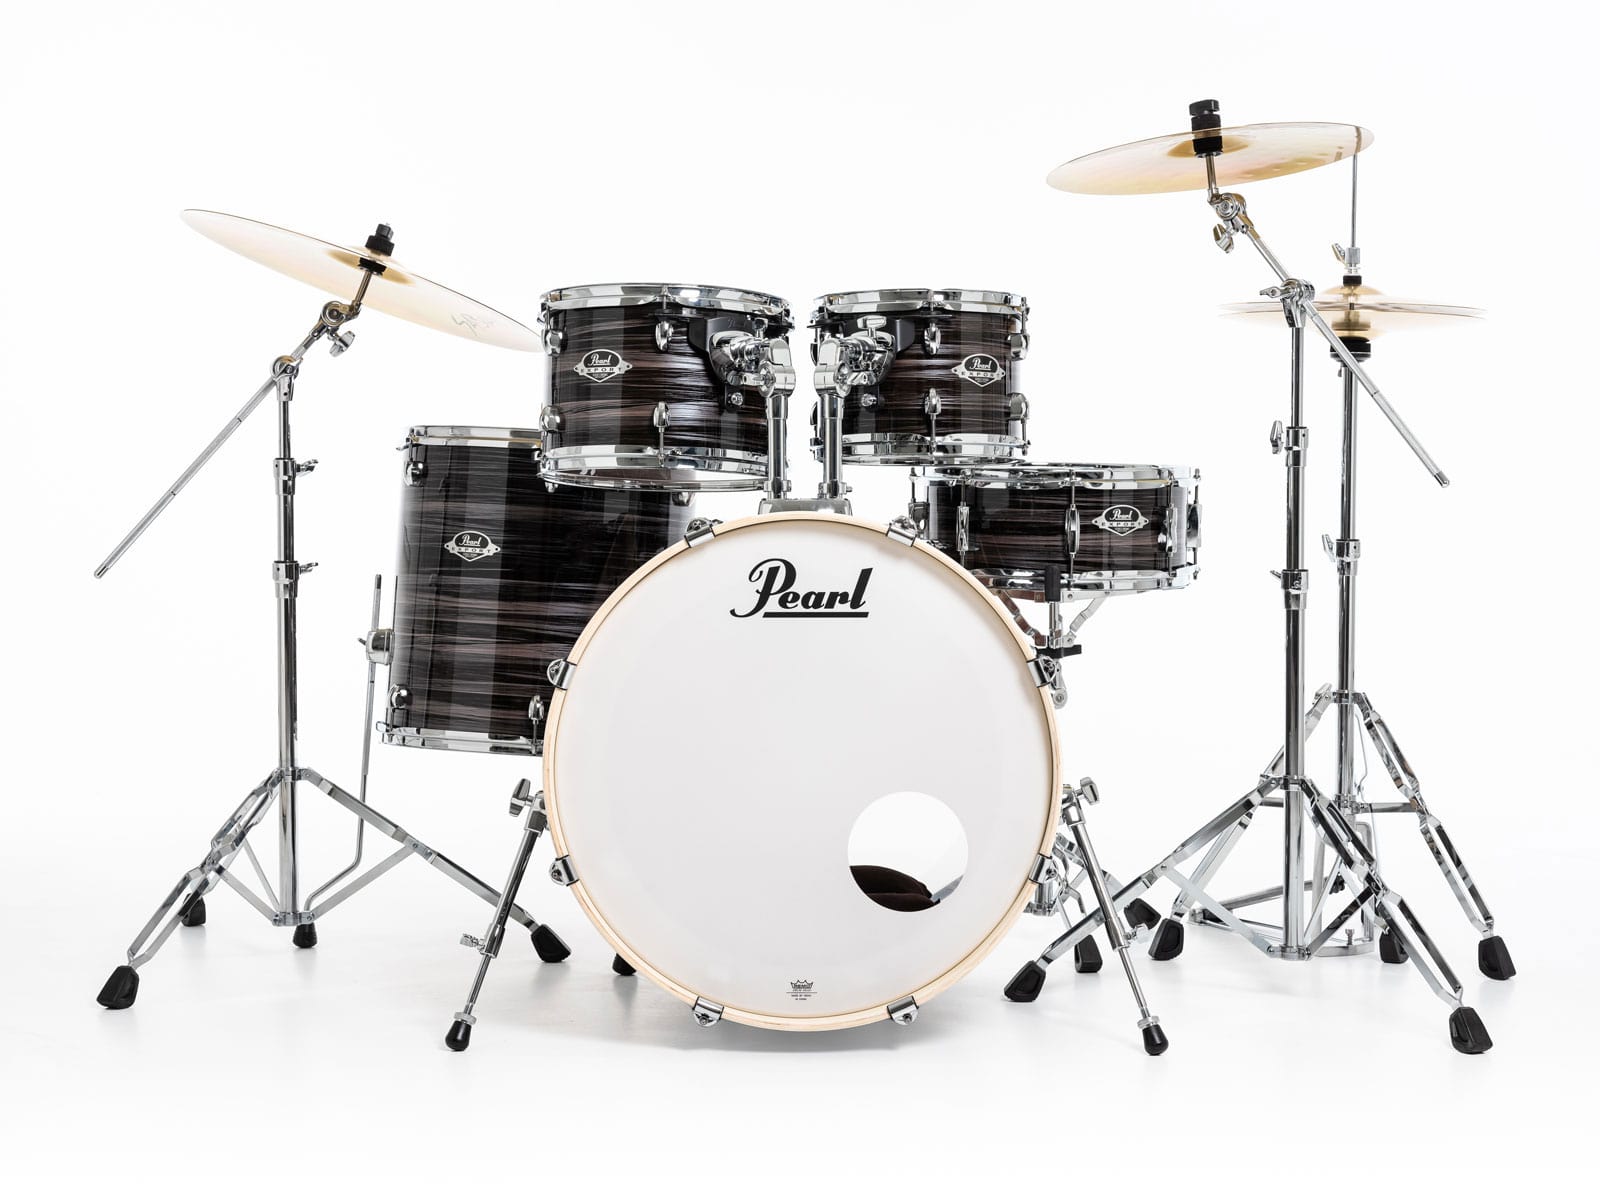 PEARL DRUMS EXPORT STAGE 22 GRAPHITE AMETHYST